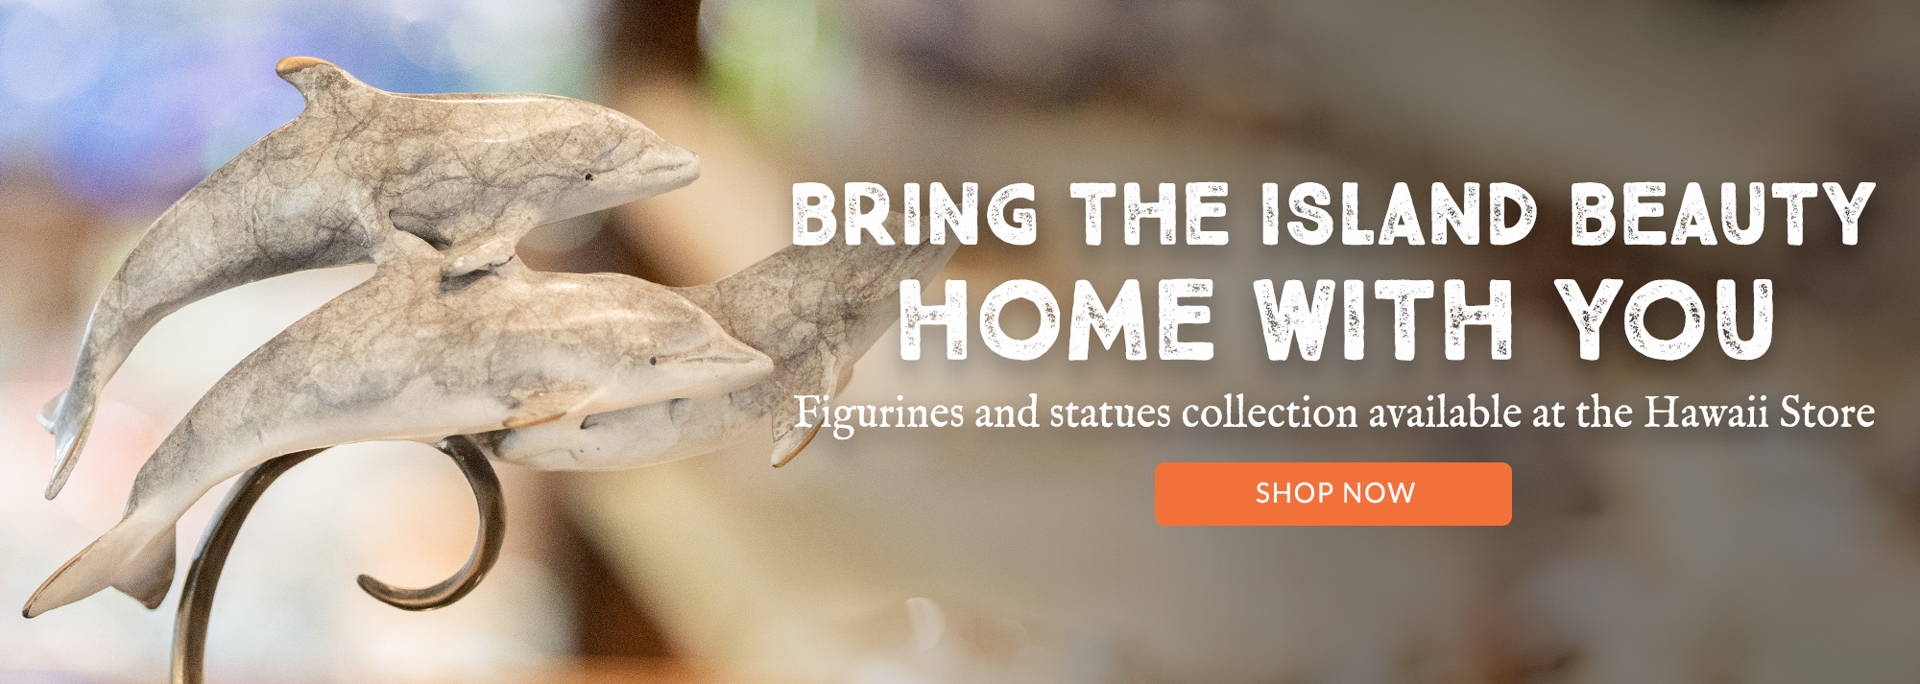 Bring the island beauty home with you! Figurines and statues collection available at the Hawaii Store